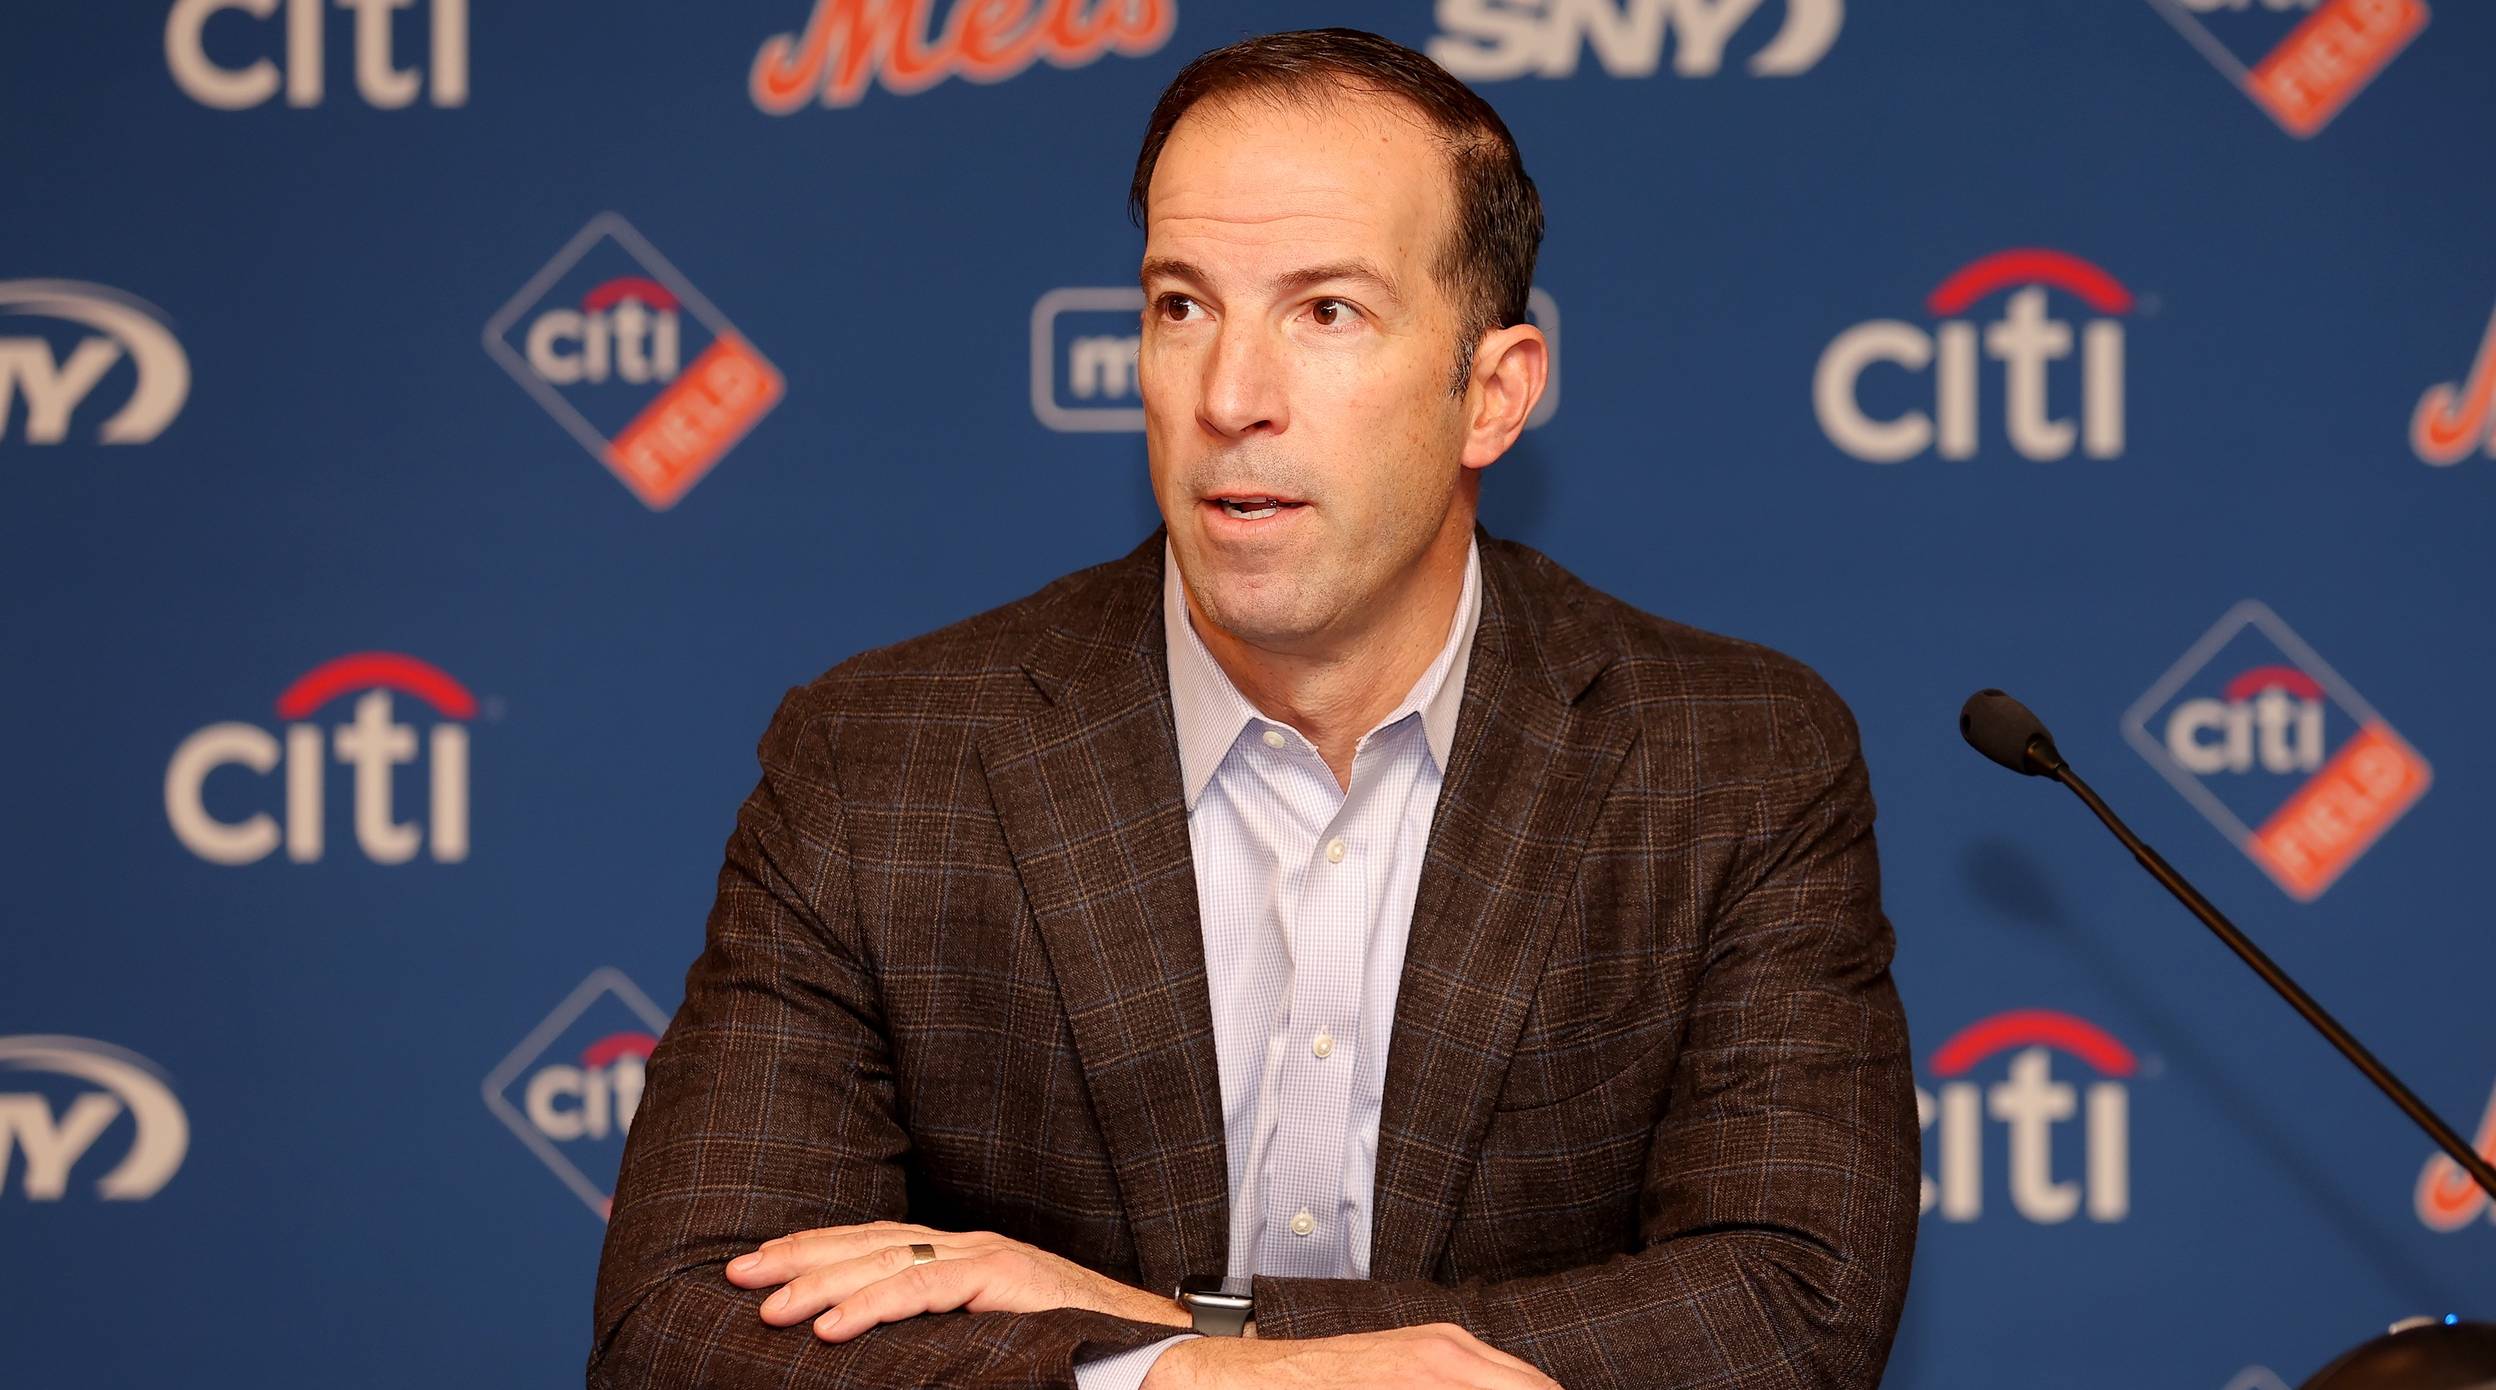 Mets general manager speaks with the media at a press conference.